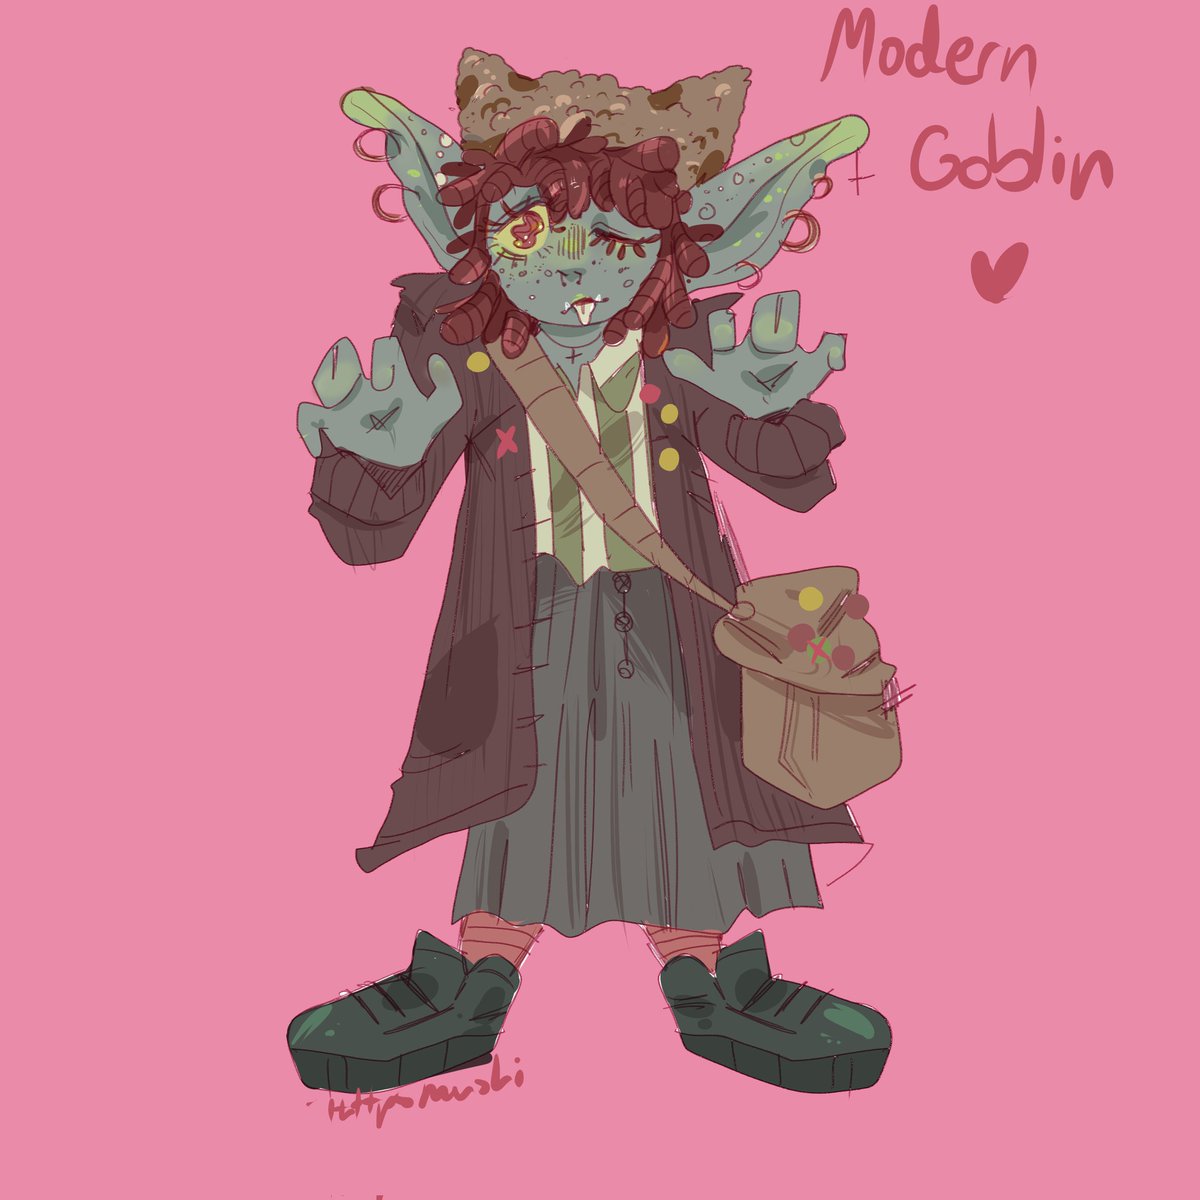 Day 5 of #gobtober2021 #inktober2021 
The prompt was a modern goblin so here is like a quick cute goblincore goblin heh
I really need that outfit tbh
#digitalart